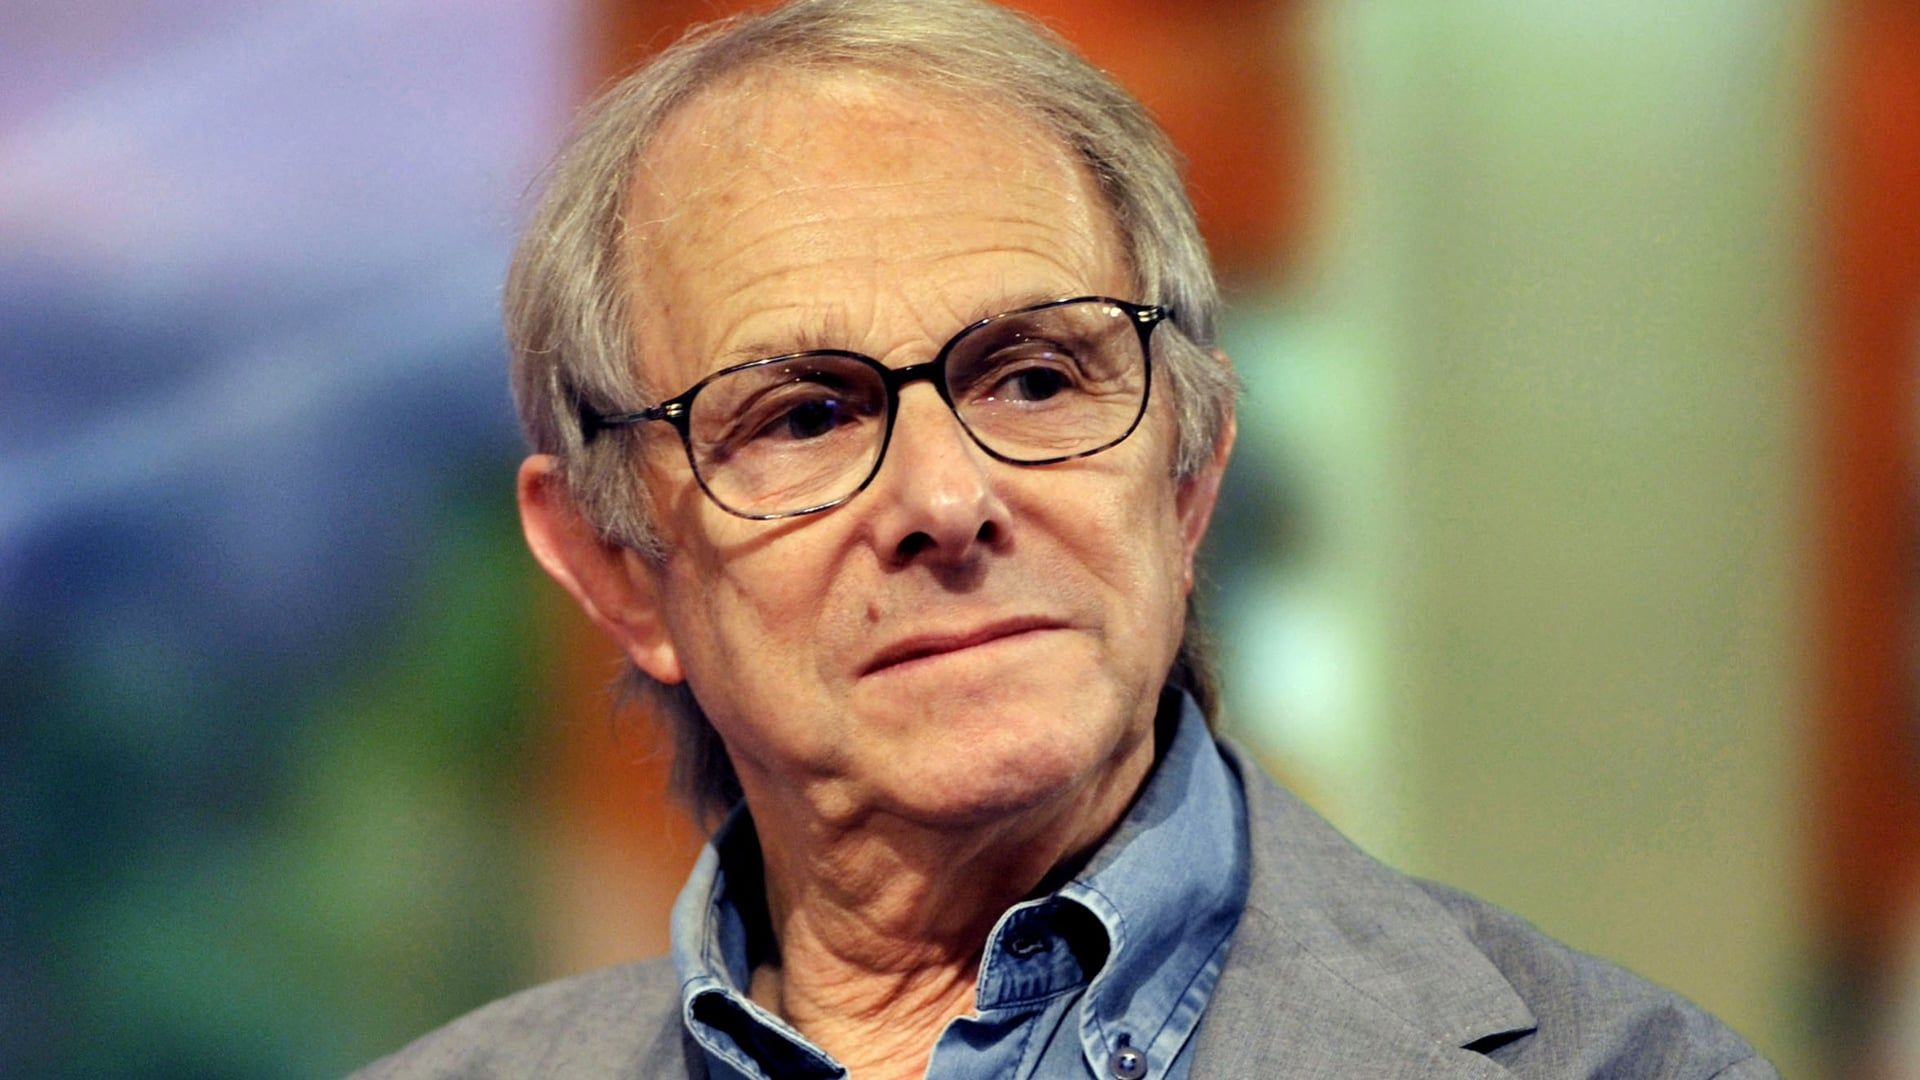 Versus: The Life and Films of Ken Loach Backdrop